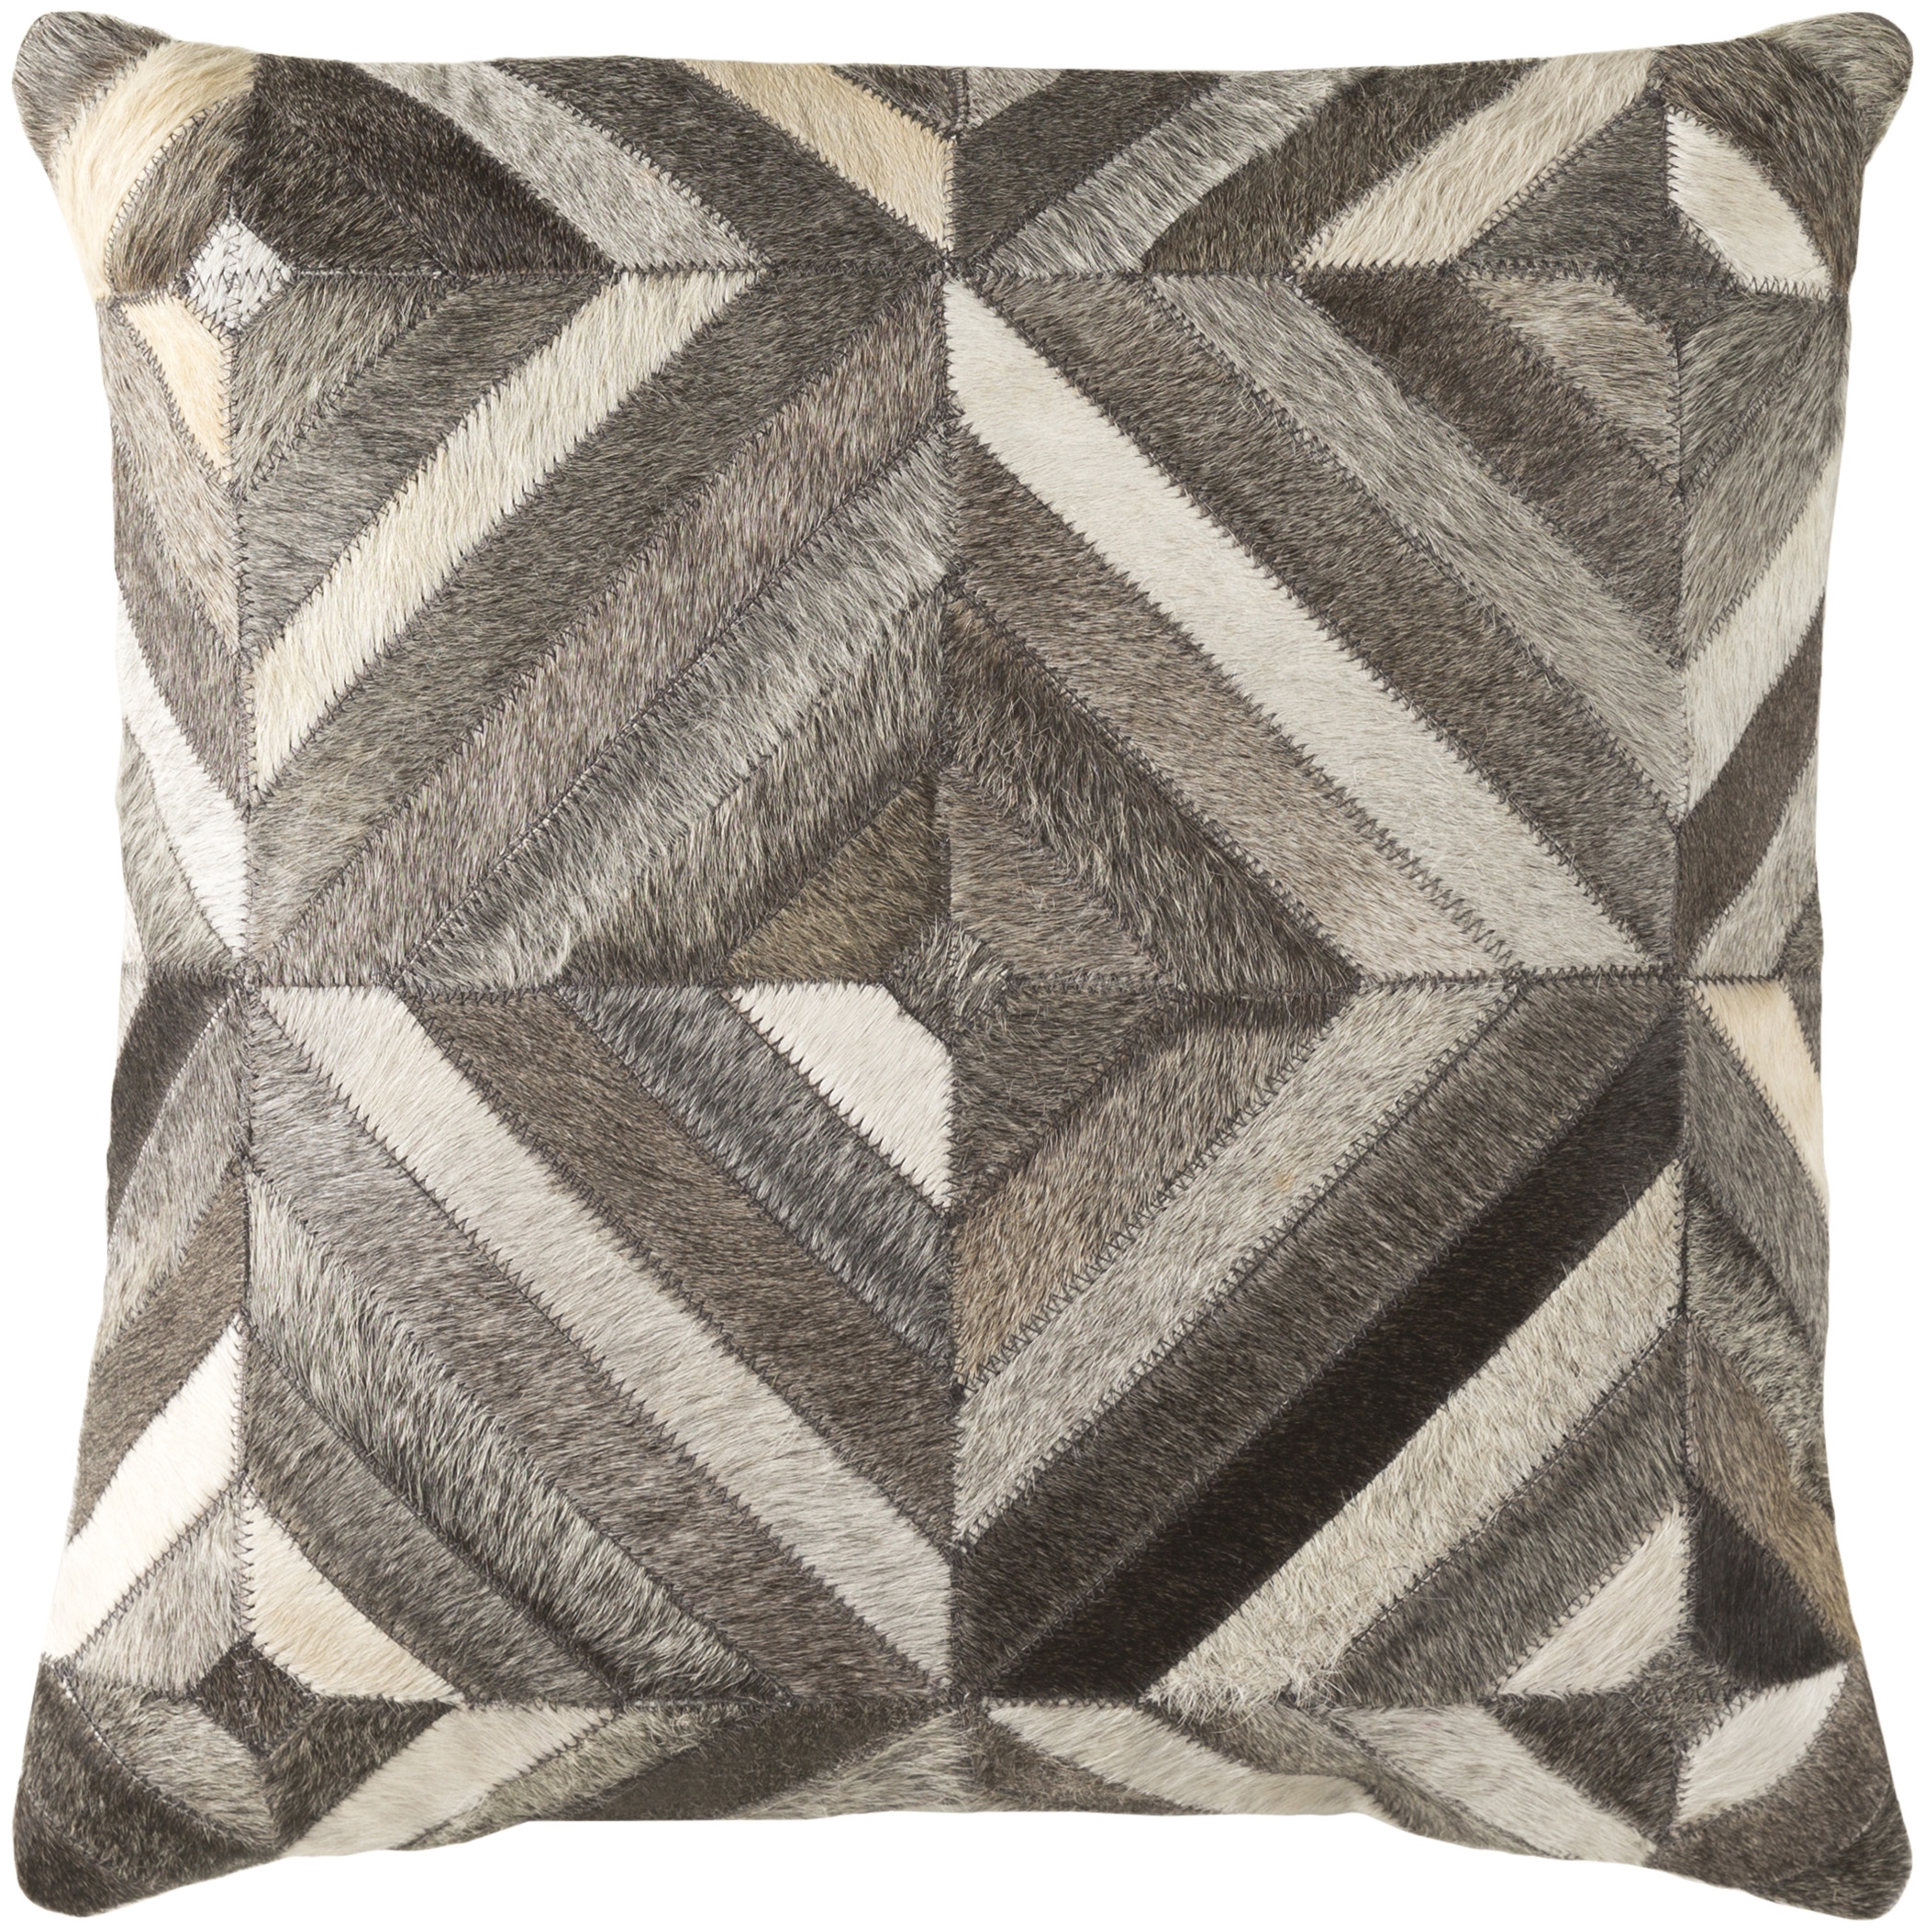 Lycaon Throw Pillow, 18" x 18", pillow cover only - Image 0